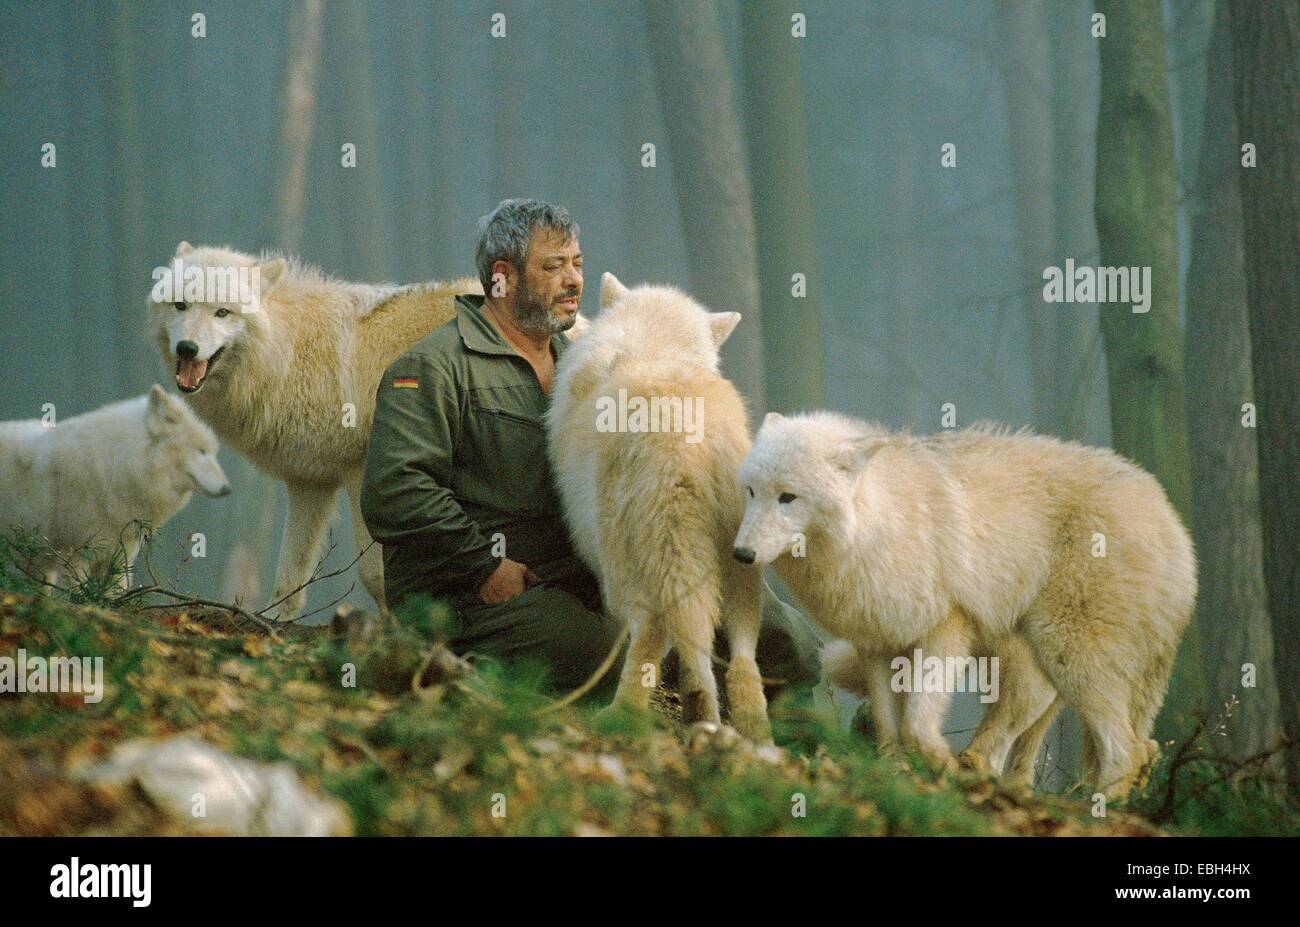 arctic wolf; tundra wolf (Canis lupus albus); Werner Freund sitting amongst a pack; Germany; Saarland; Merzig. Stock Photo